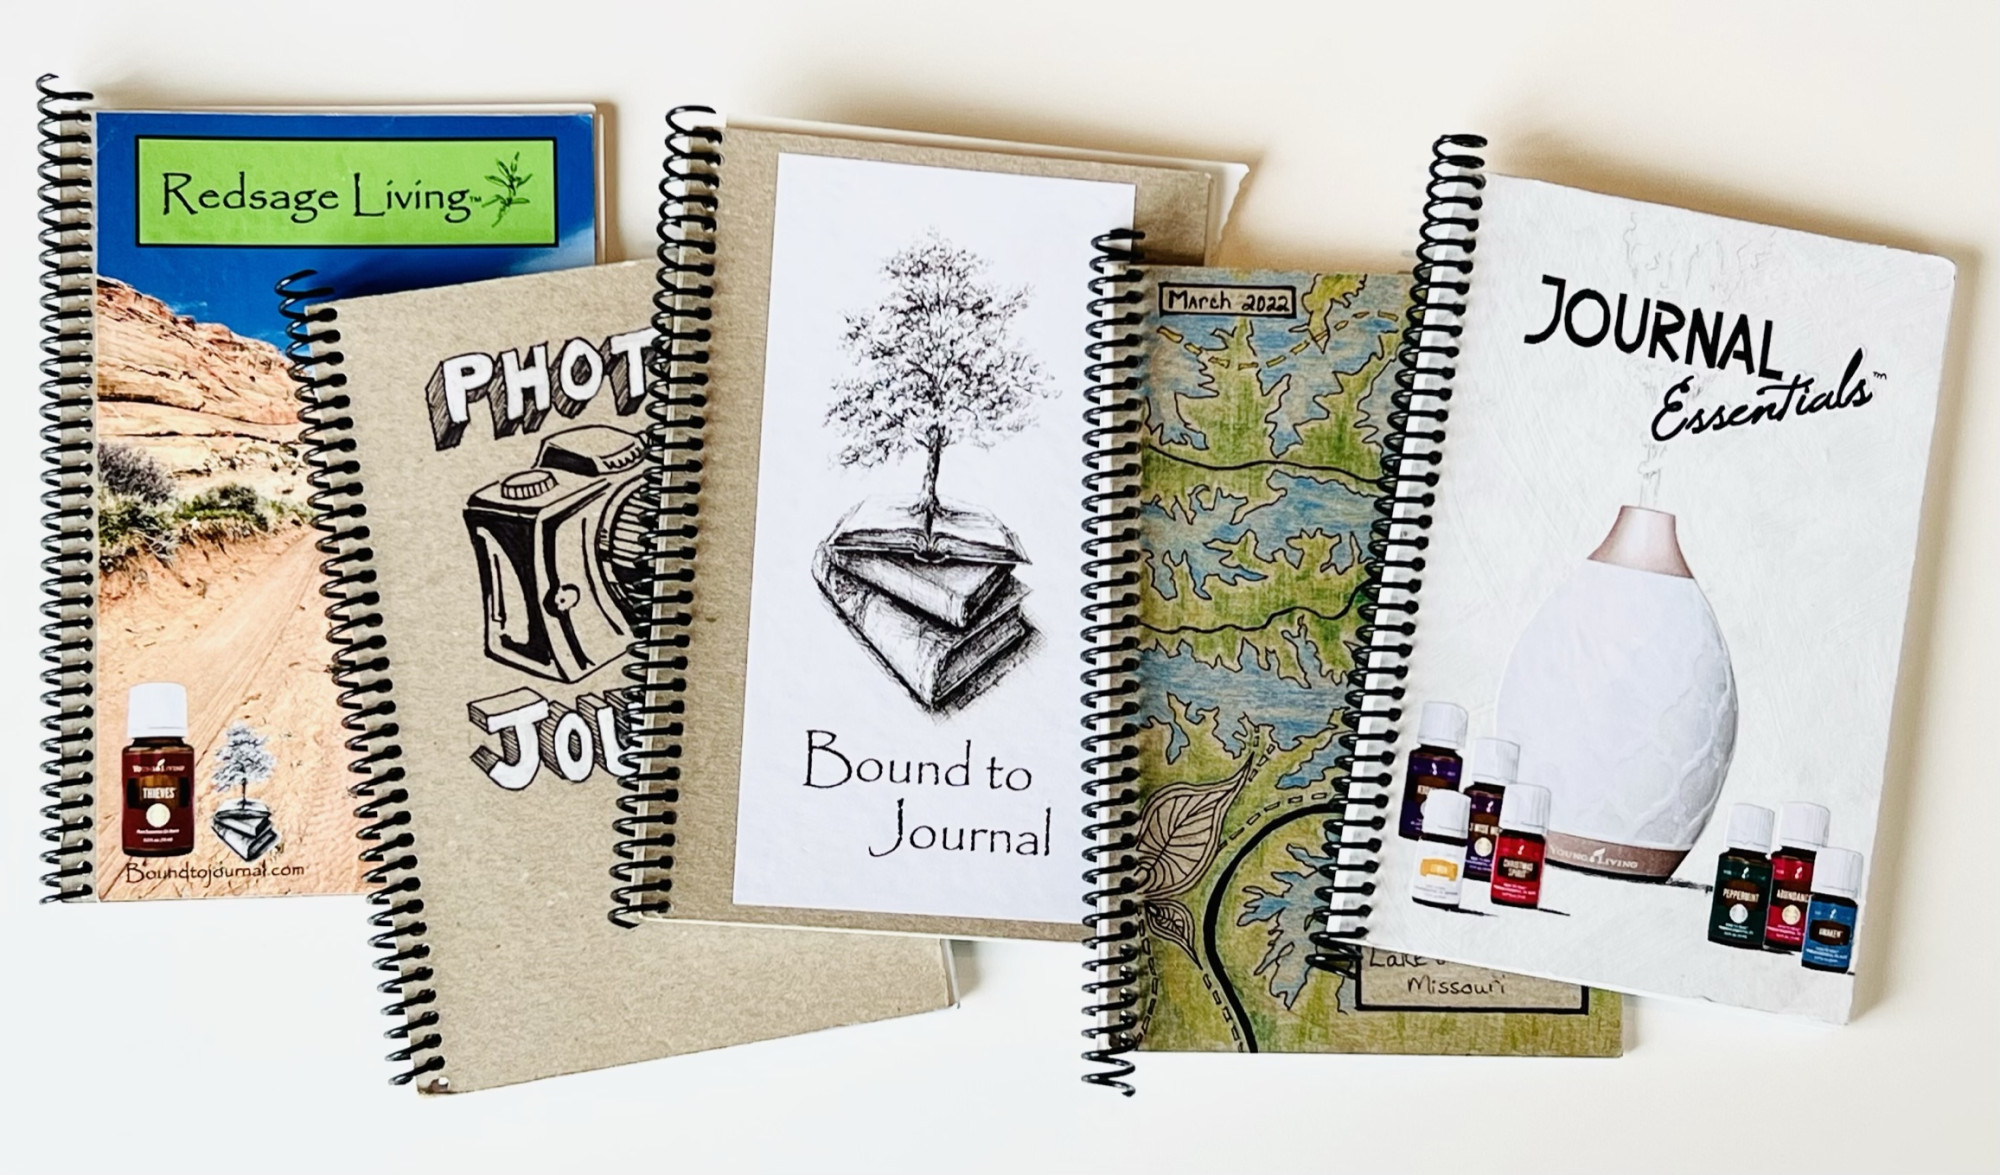 Bound to Journal examples of journals that travel with us at all times.  Our Photo Journal, Journal Essentials for essetial oil information, our business Redsage Living LLC journal, notes along the road, and our Bound to Journal plans for articles, social media, etc.